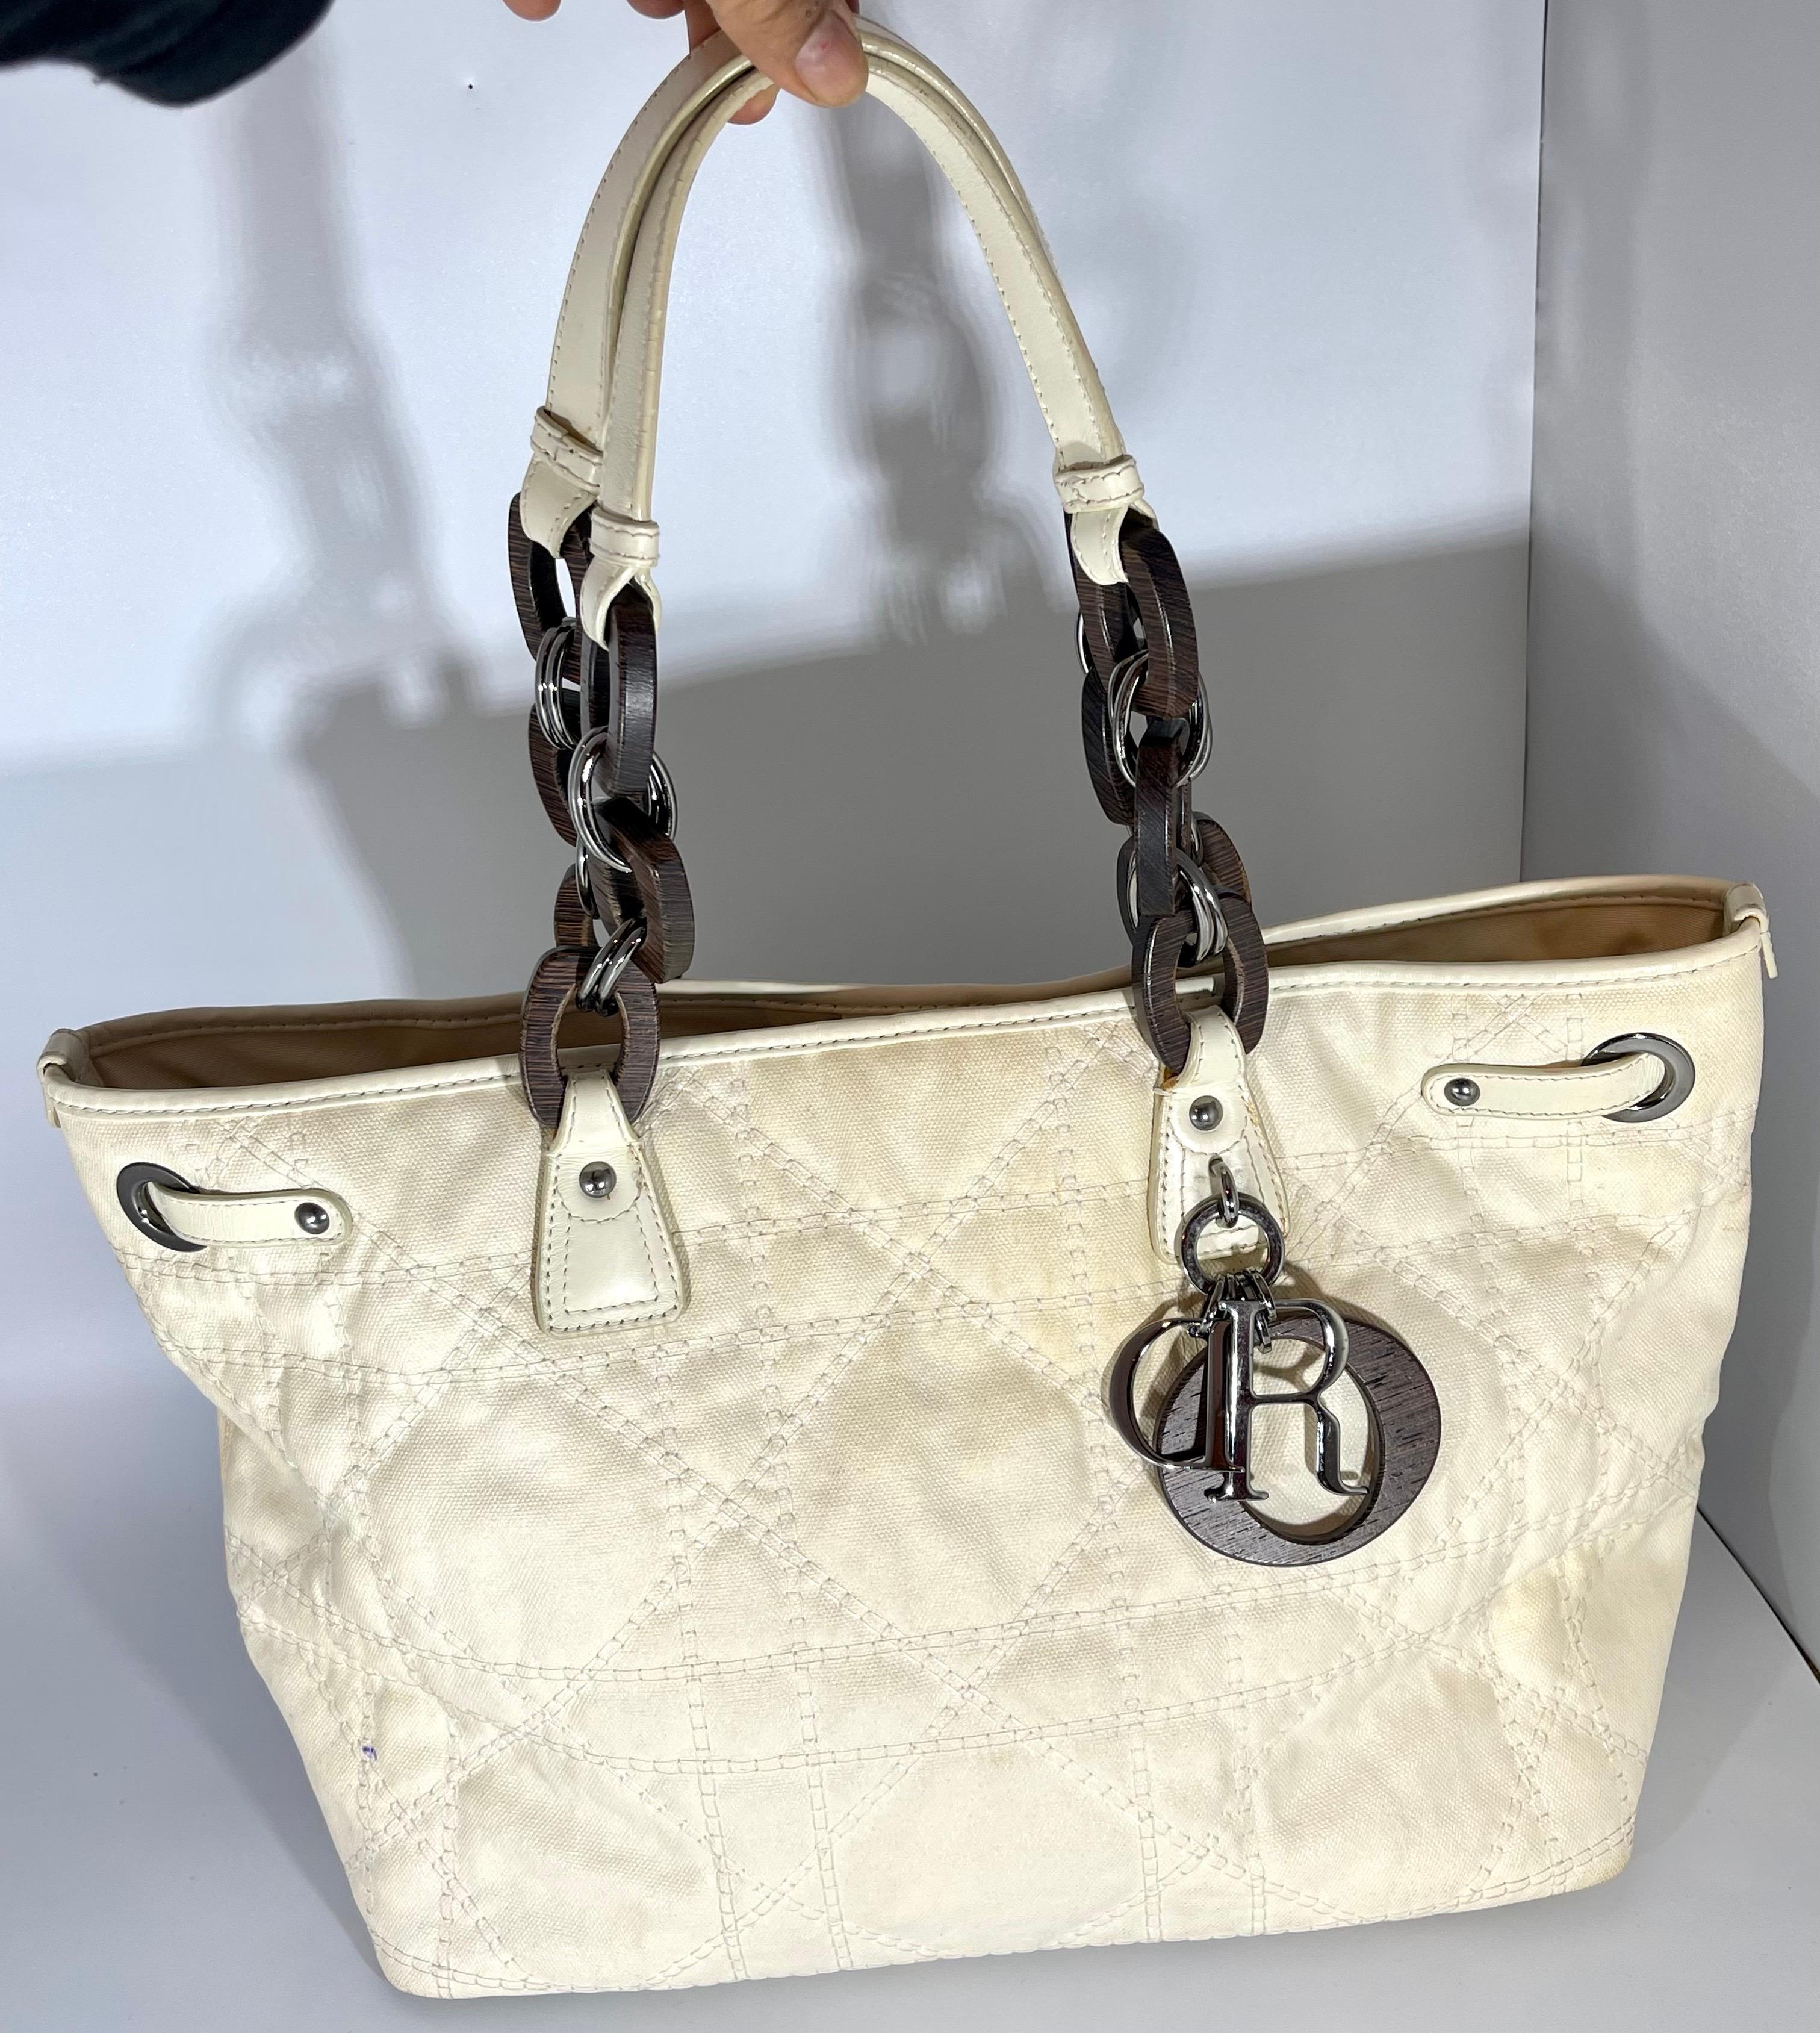 Christian  Dior Tote Shopping  Bag White Canvas Bag With Logo,  Medium  In Excellent Condition For Sale In New York, NY